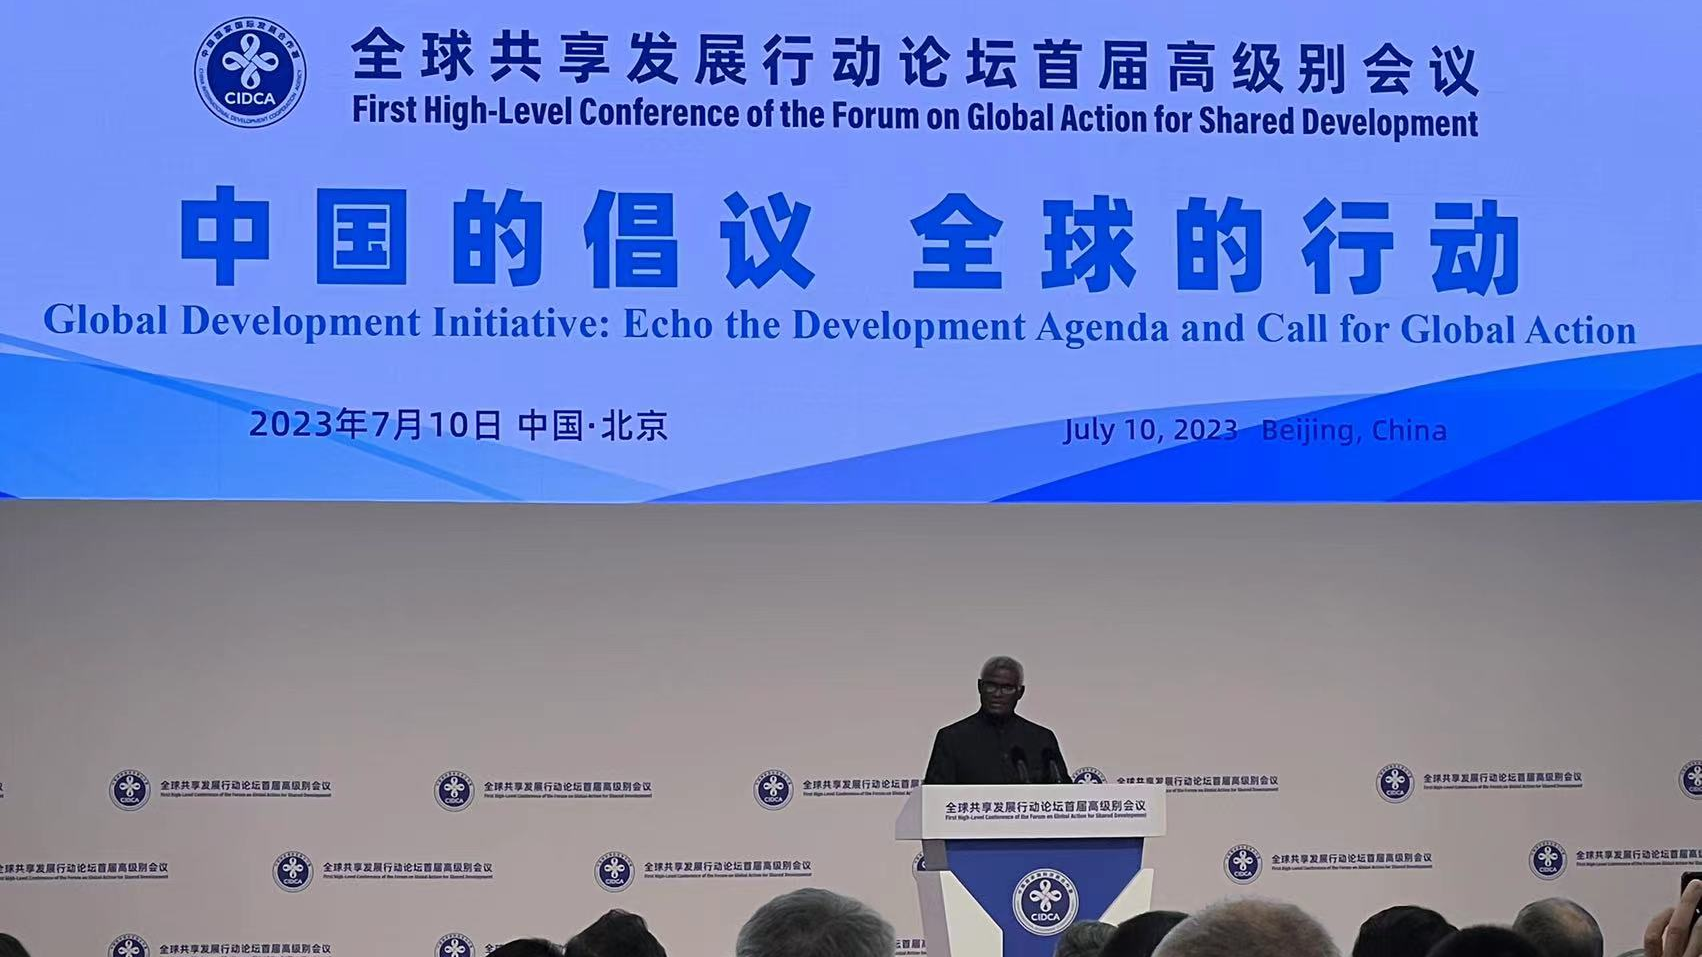 Solomon Islands Prime Minister Manasseh Sogavare delivers a keynote speech at the Forum on Global Action for Shared Development in Beijing, July 10, 2023. /CGTN